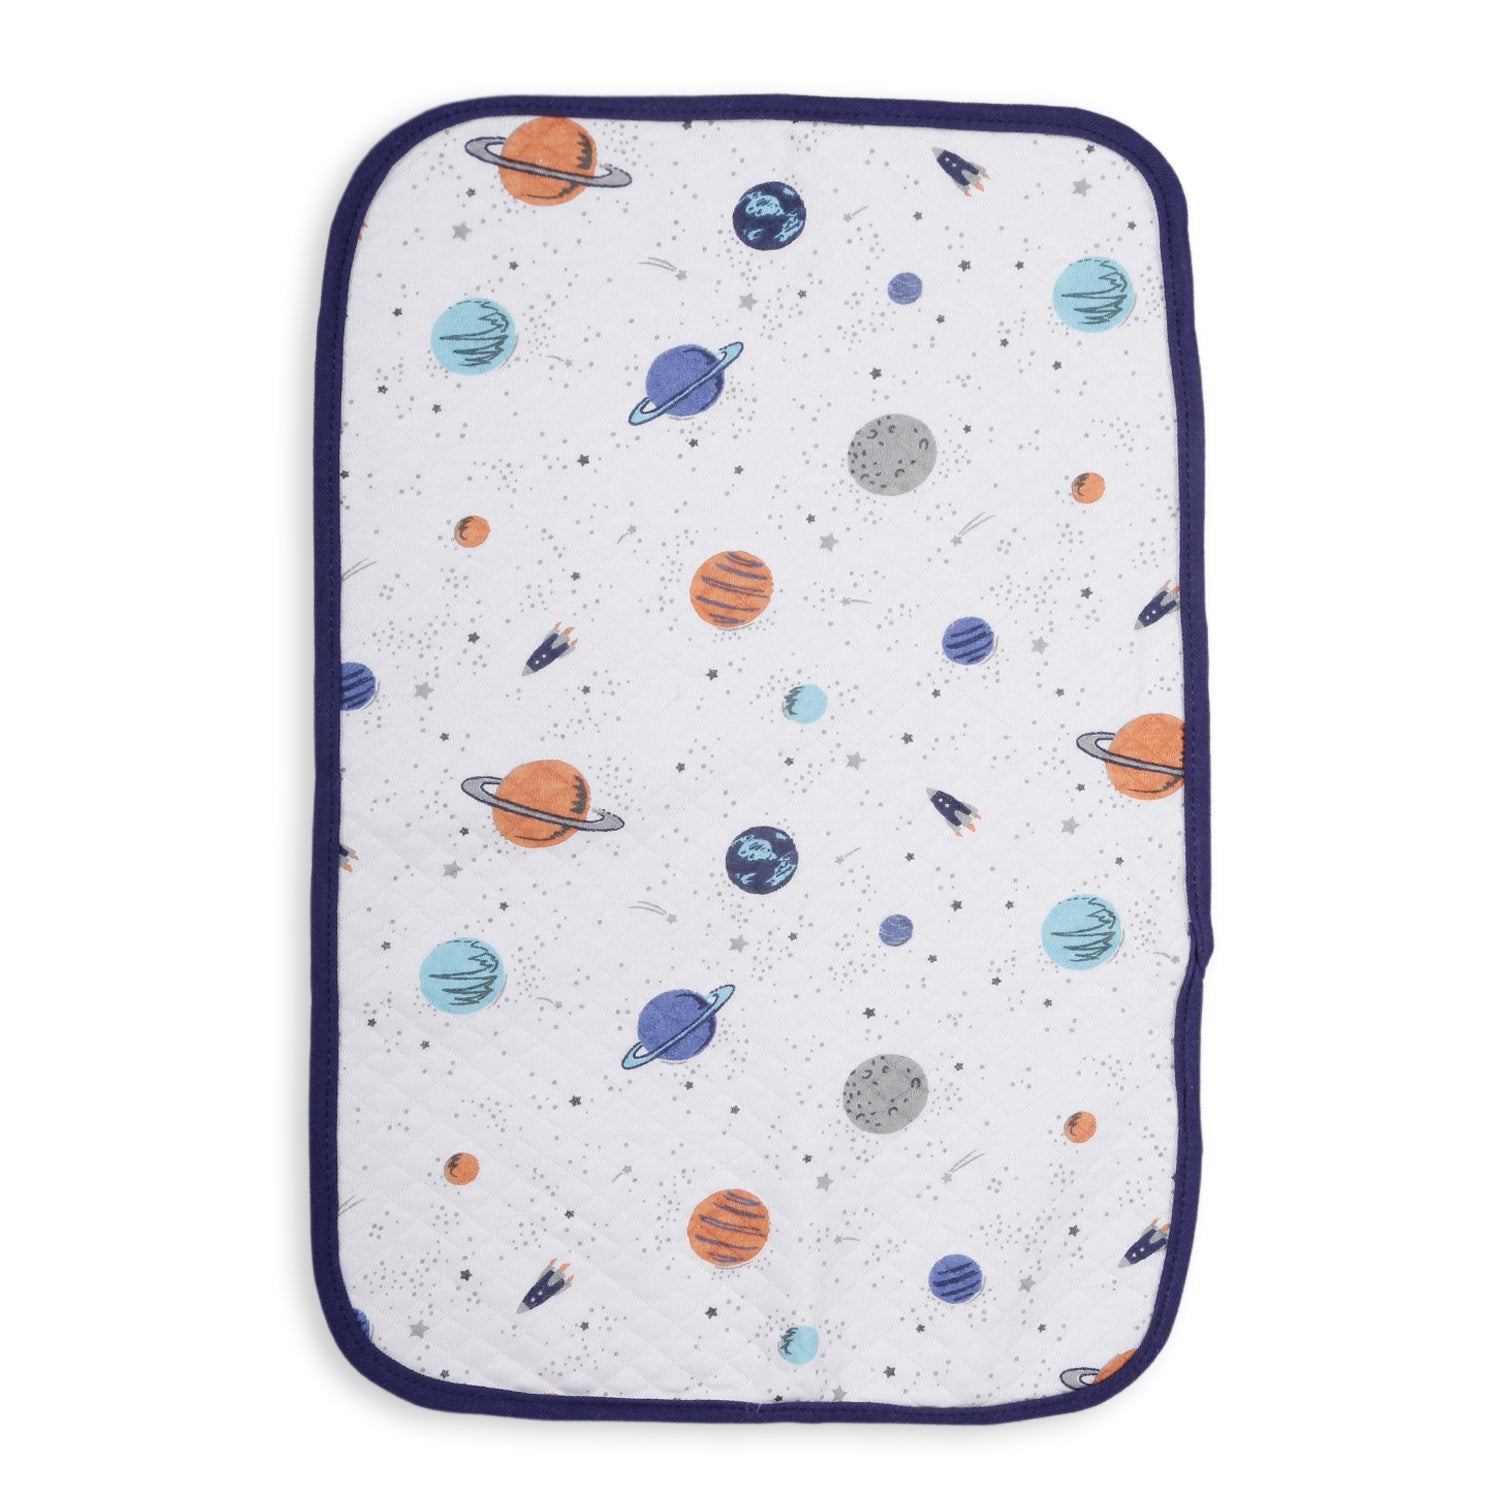 Burp Cloths For Drooling And Feeding Pack Of 3 Space Blue - Baby Moo